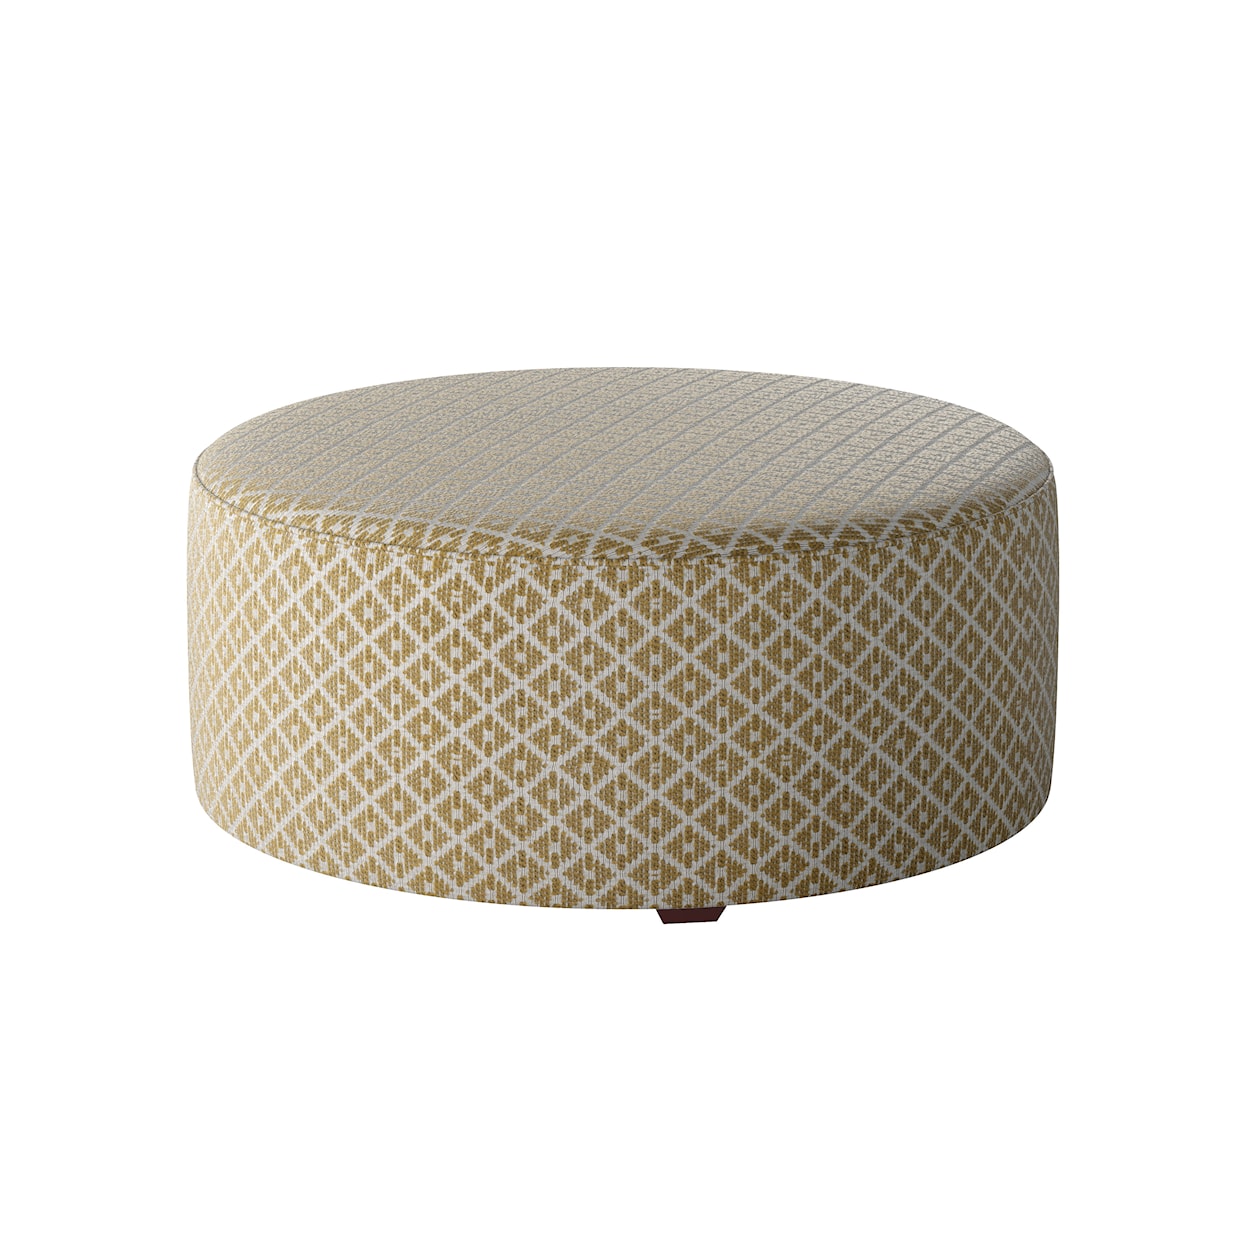 Fusion Furniture 7000 LIMELIGHT MINERAL Cocktail Ottoman